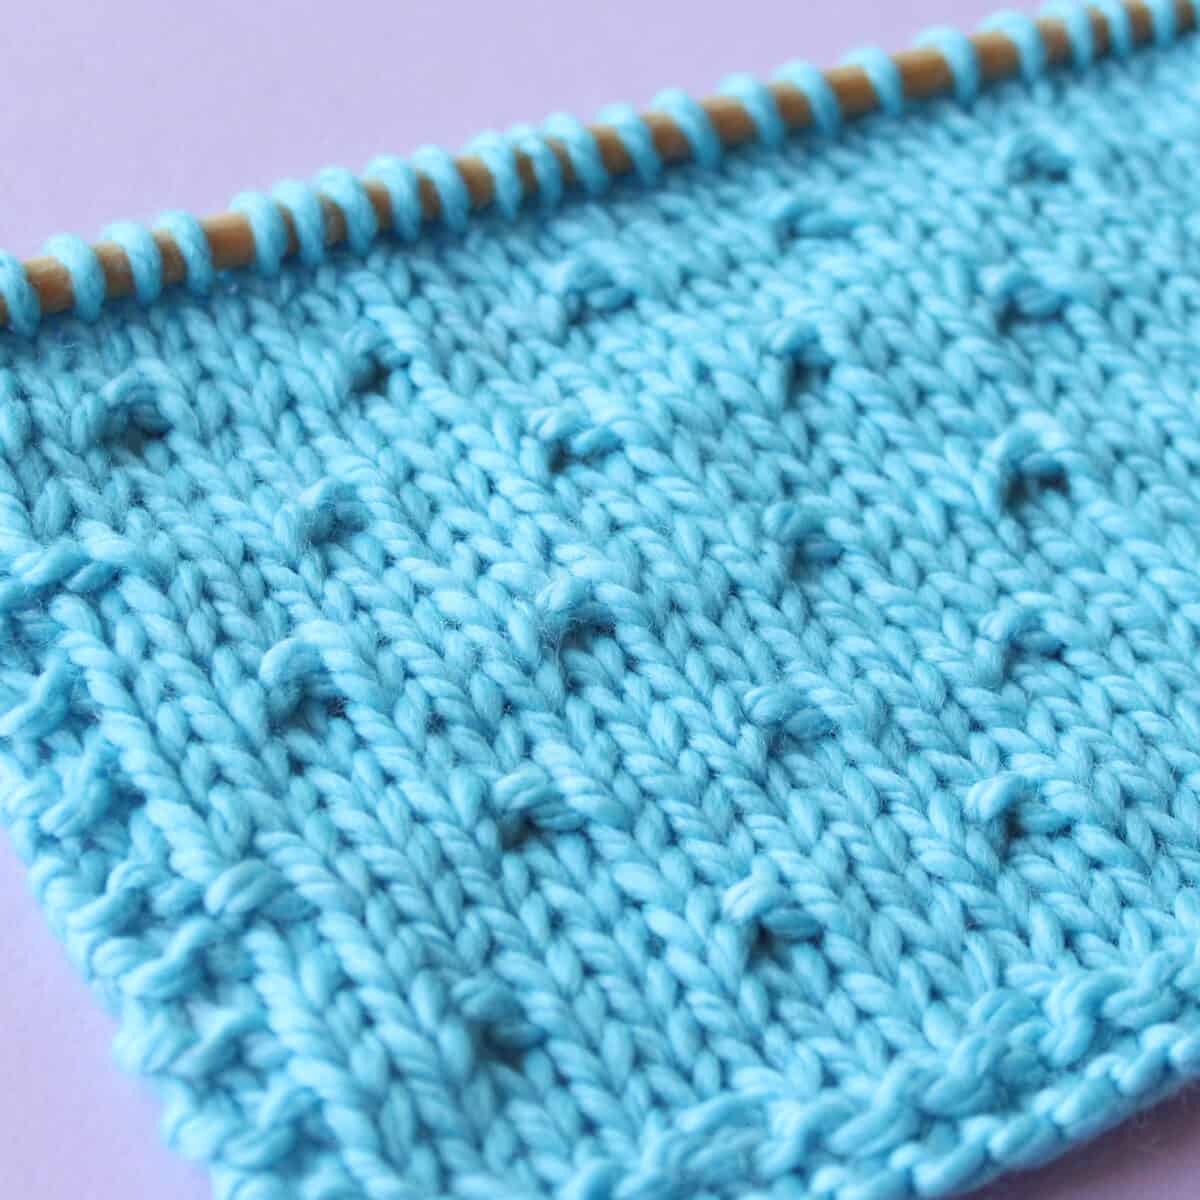 Swatch of Simple Seed Stitch Pattern in blue yarn on knitting needle atop a purple background.